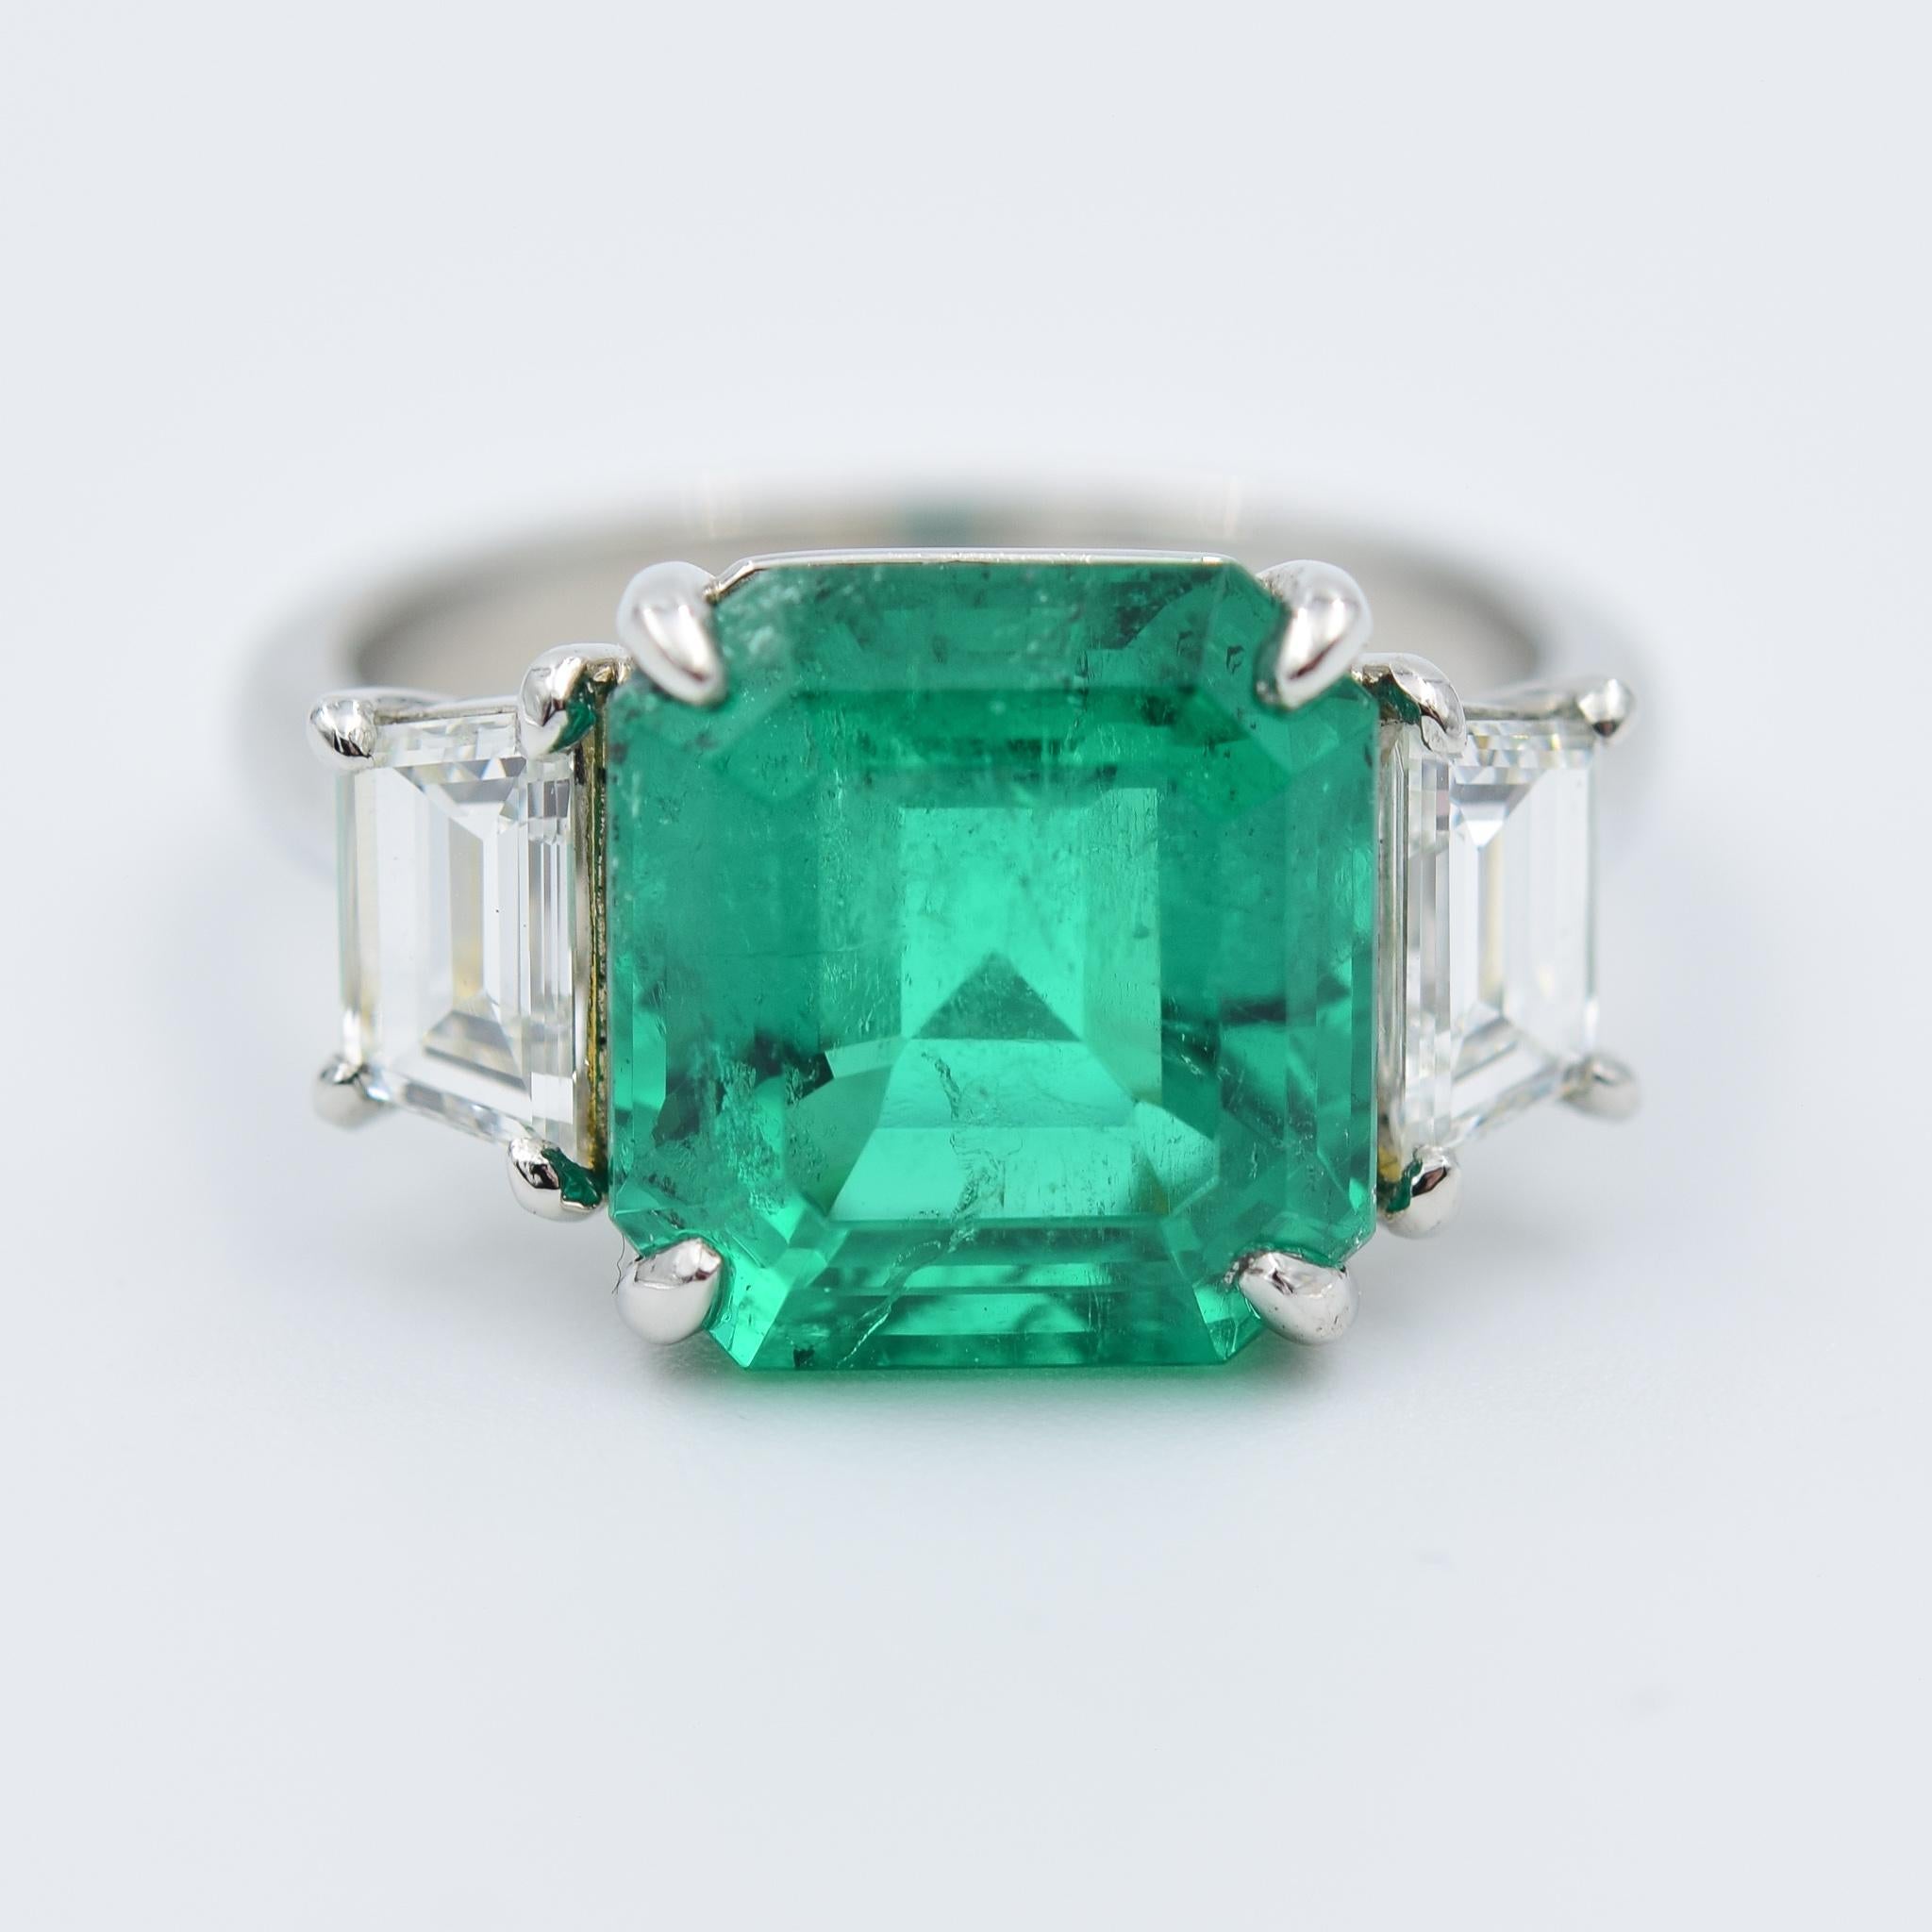 This ring hosts a 4.64 carat Columbian Emerald with a fascinating emerald cut styling.  The emerald has an AGL report which is pictured in the photos for further details on the characteristics.  The mounting wonderfully compliments the gemstone with